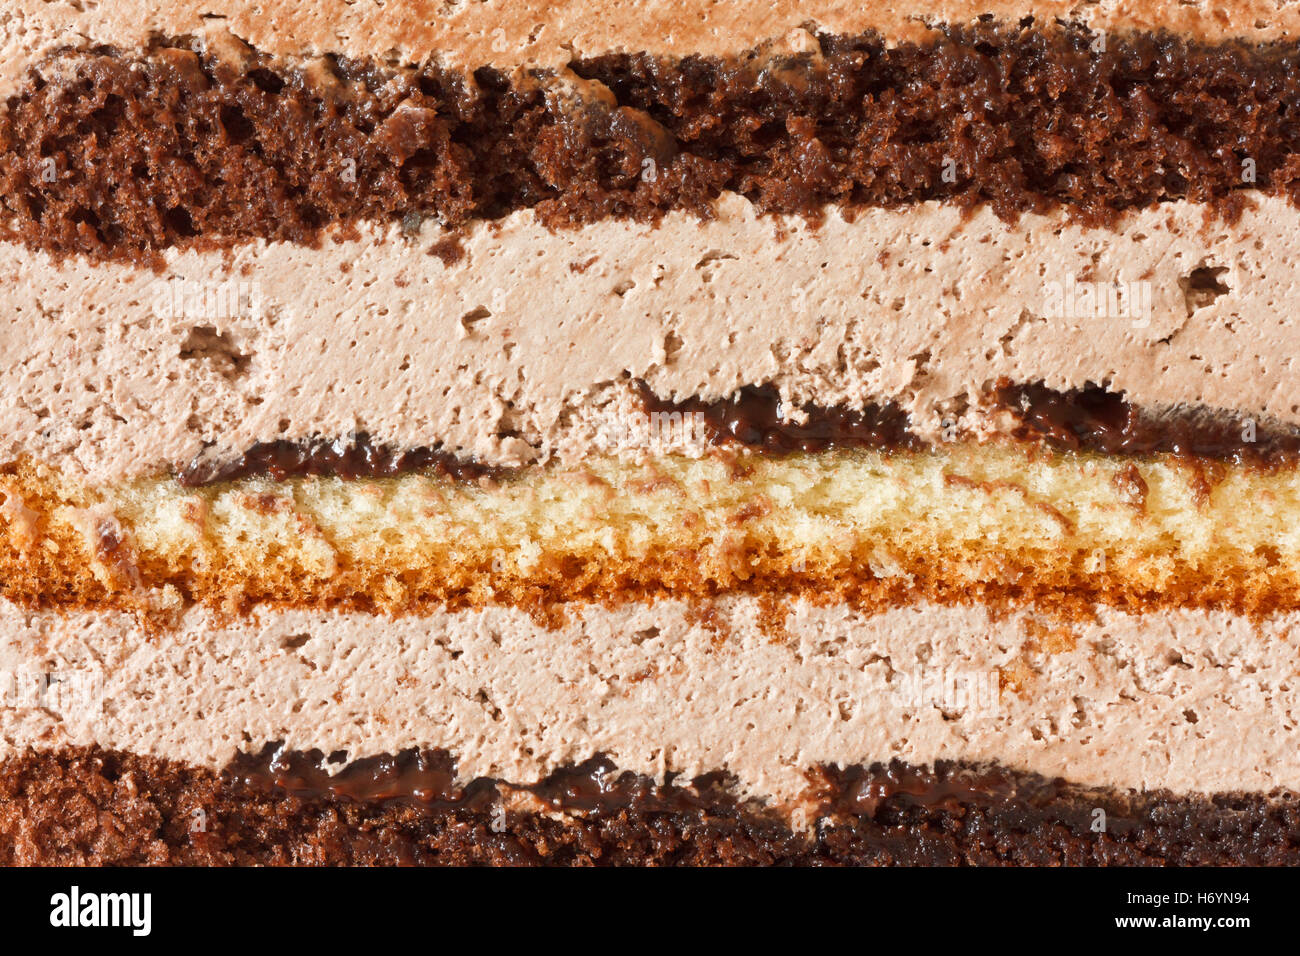 Layered chocolate cake detail as a background Stock Photo